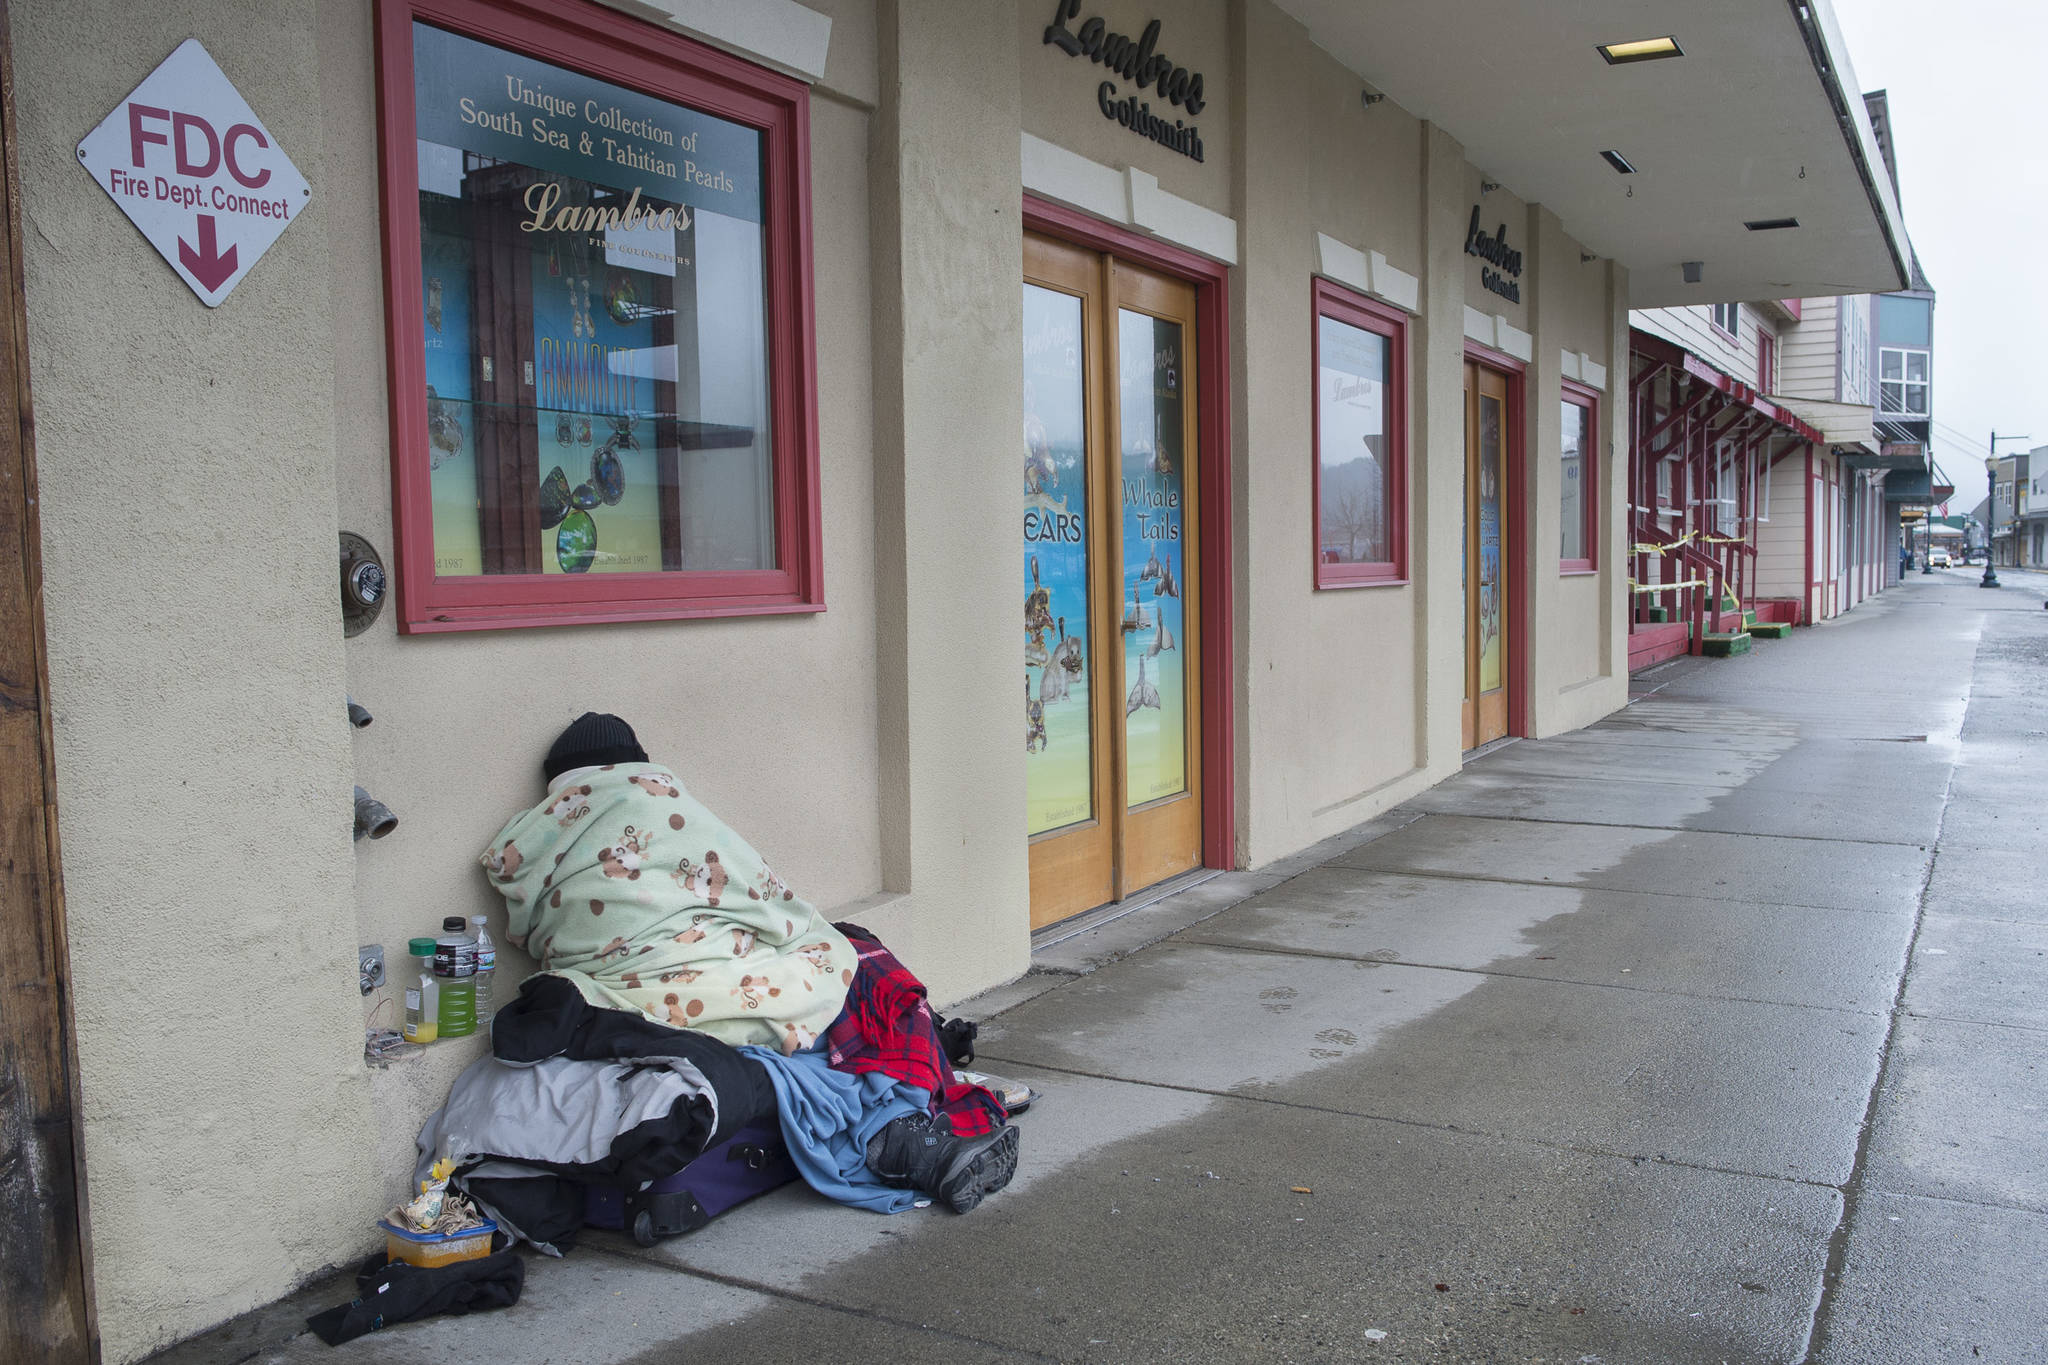 A homeless person sleeps on the sidewalk along South Franklin Street on Friday, March 15, 2019. (Michael Penn | Juneau Empire File)